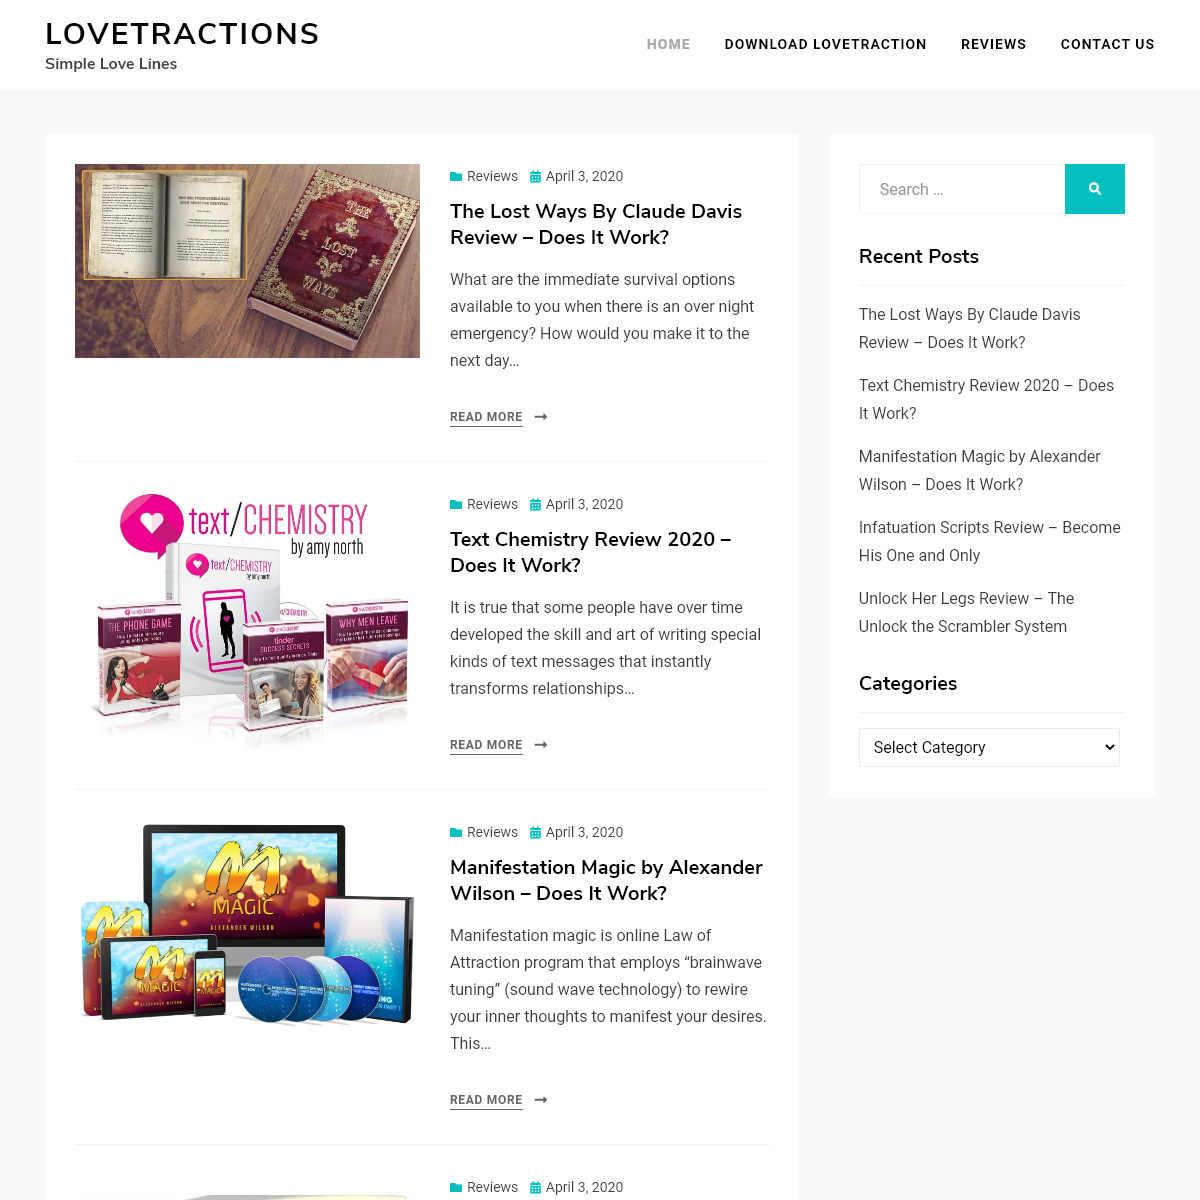 A complete backup of lovetractions.com